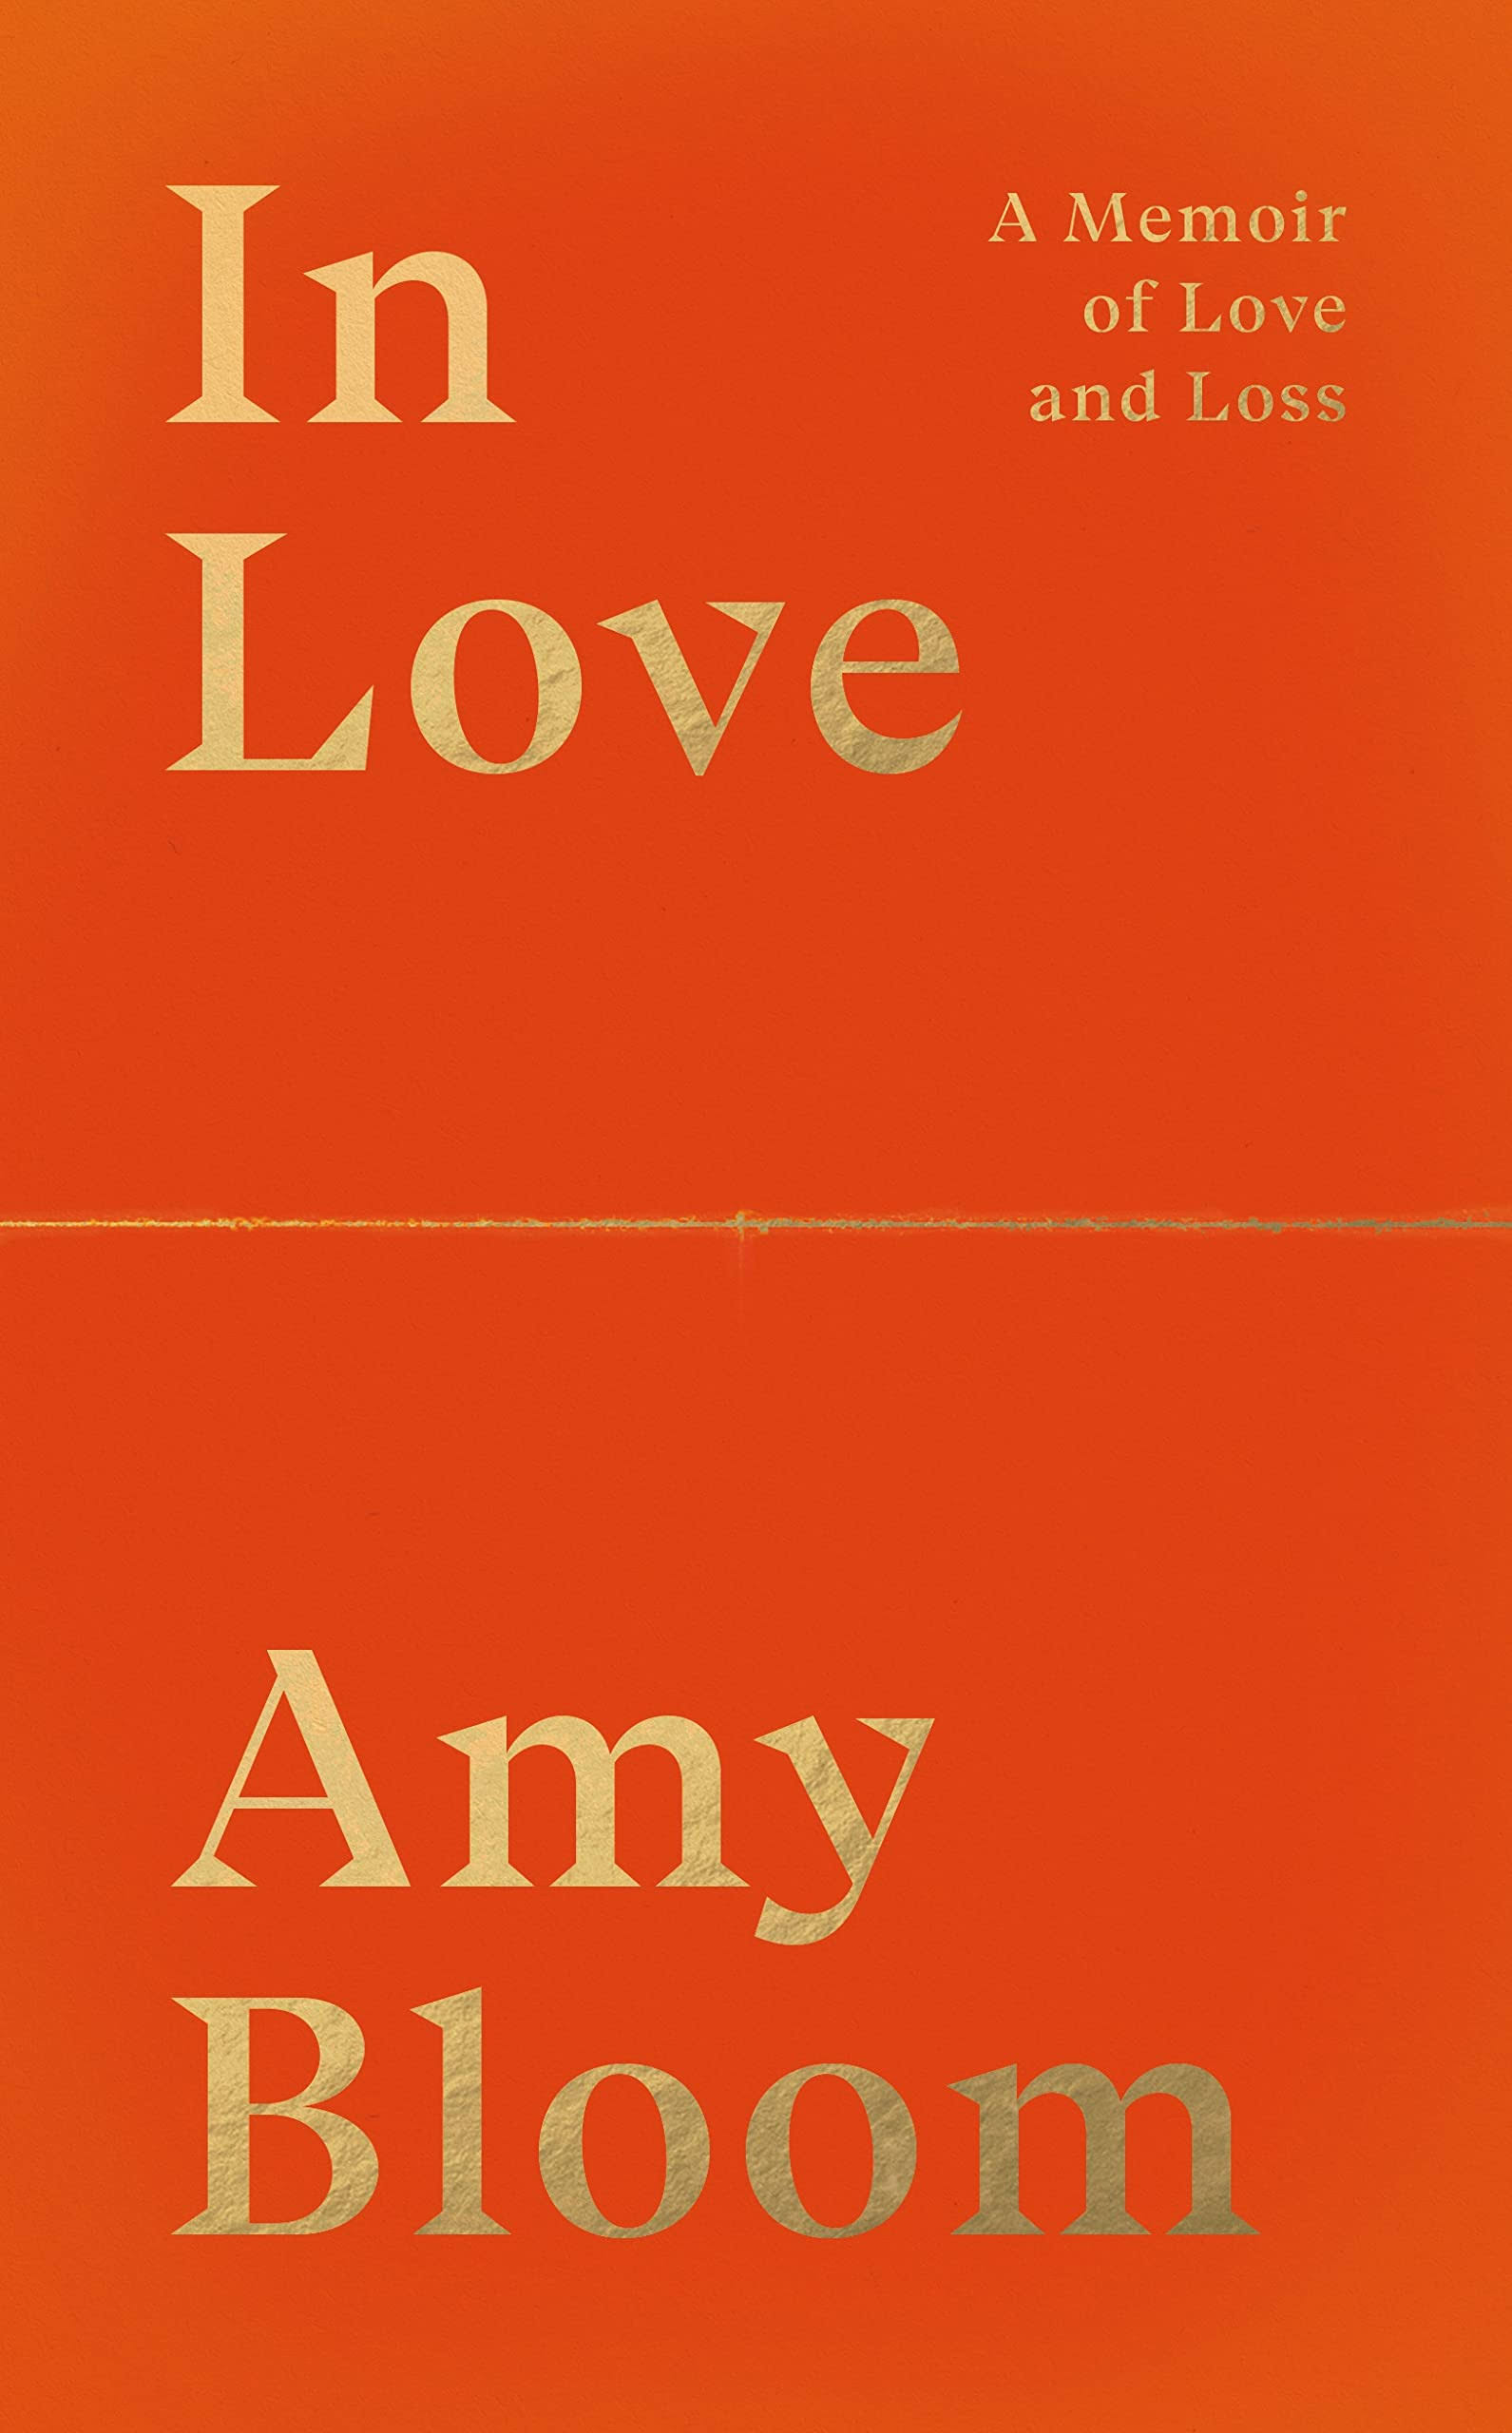 In Love by Amy Bloom